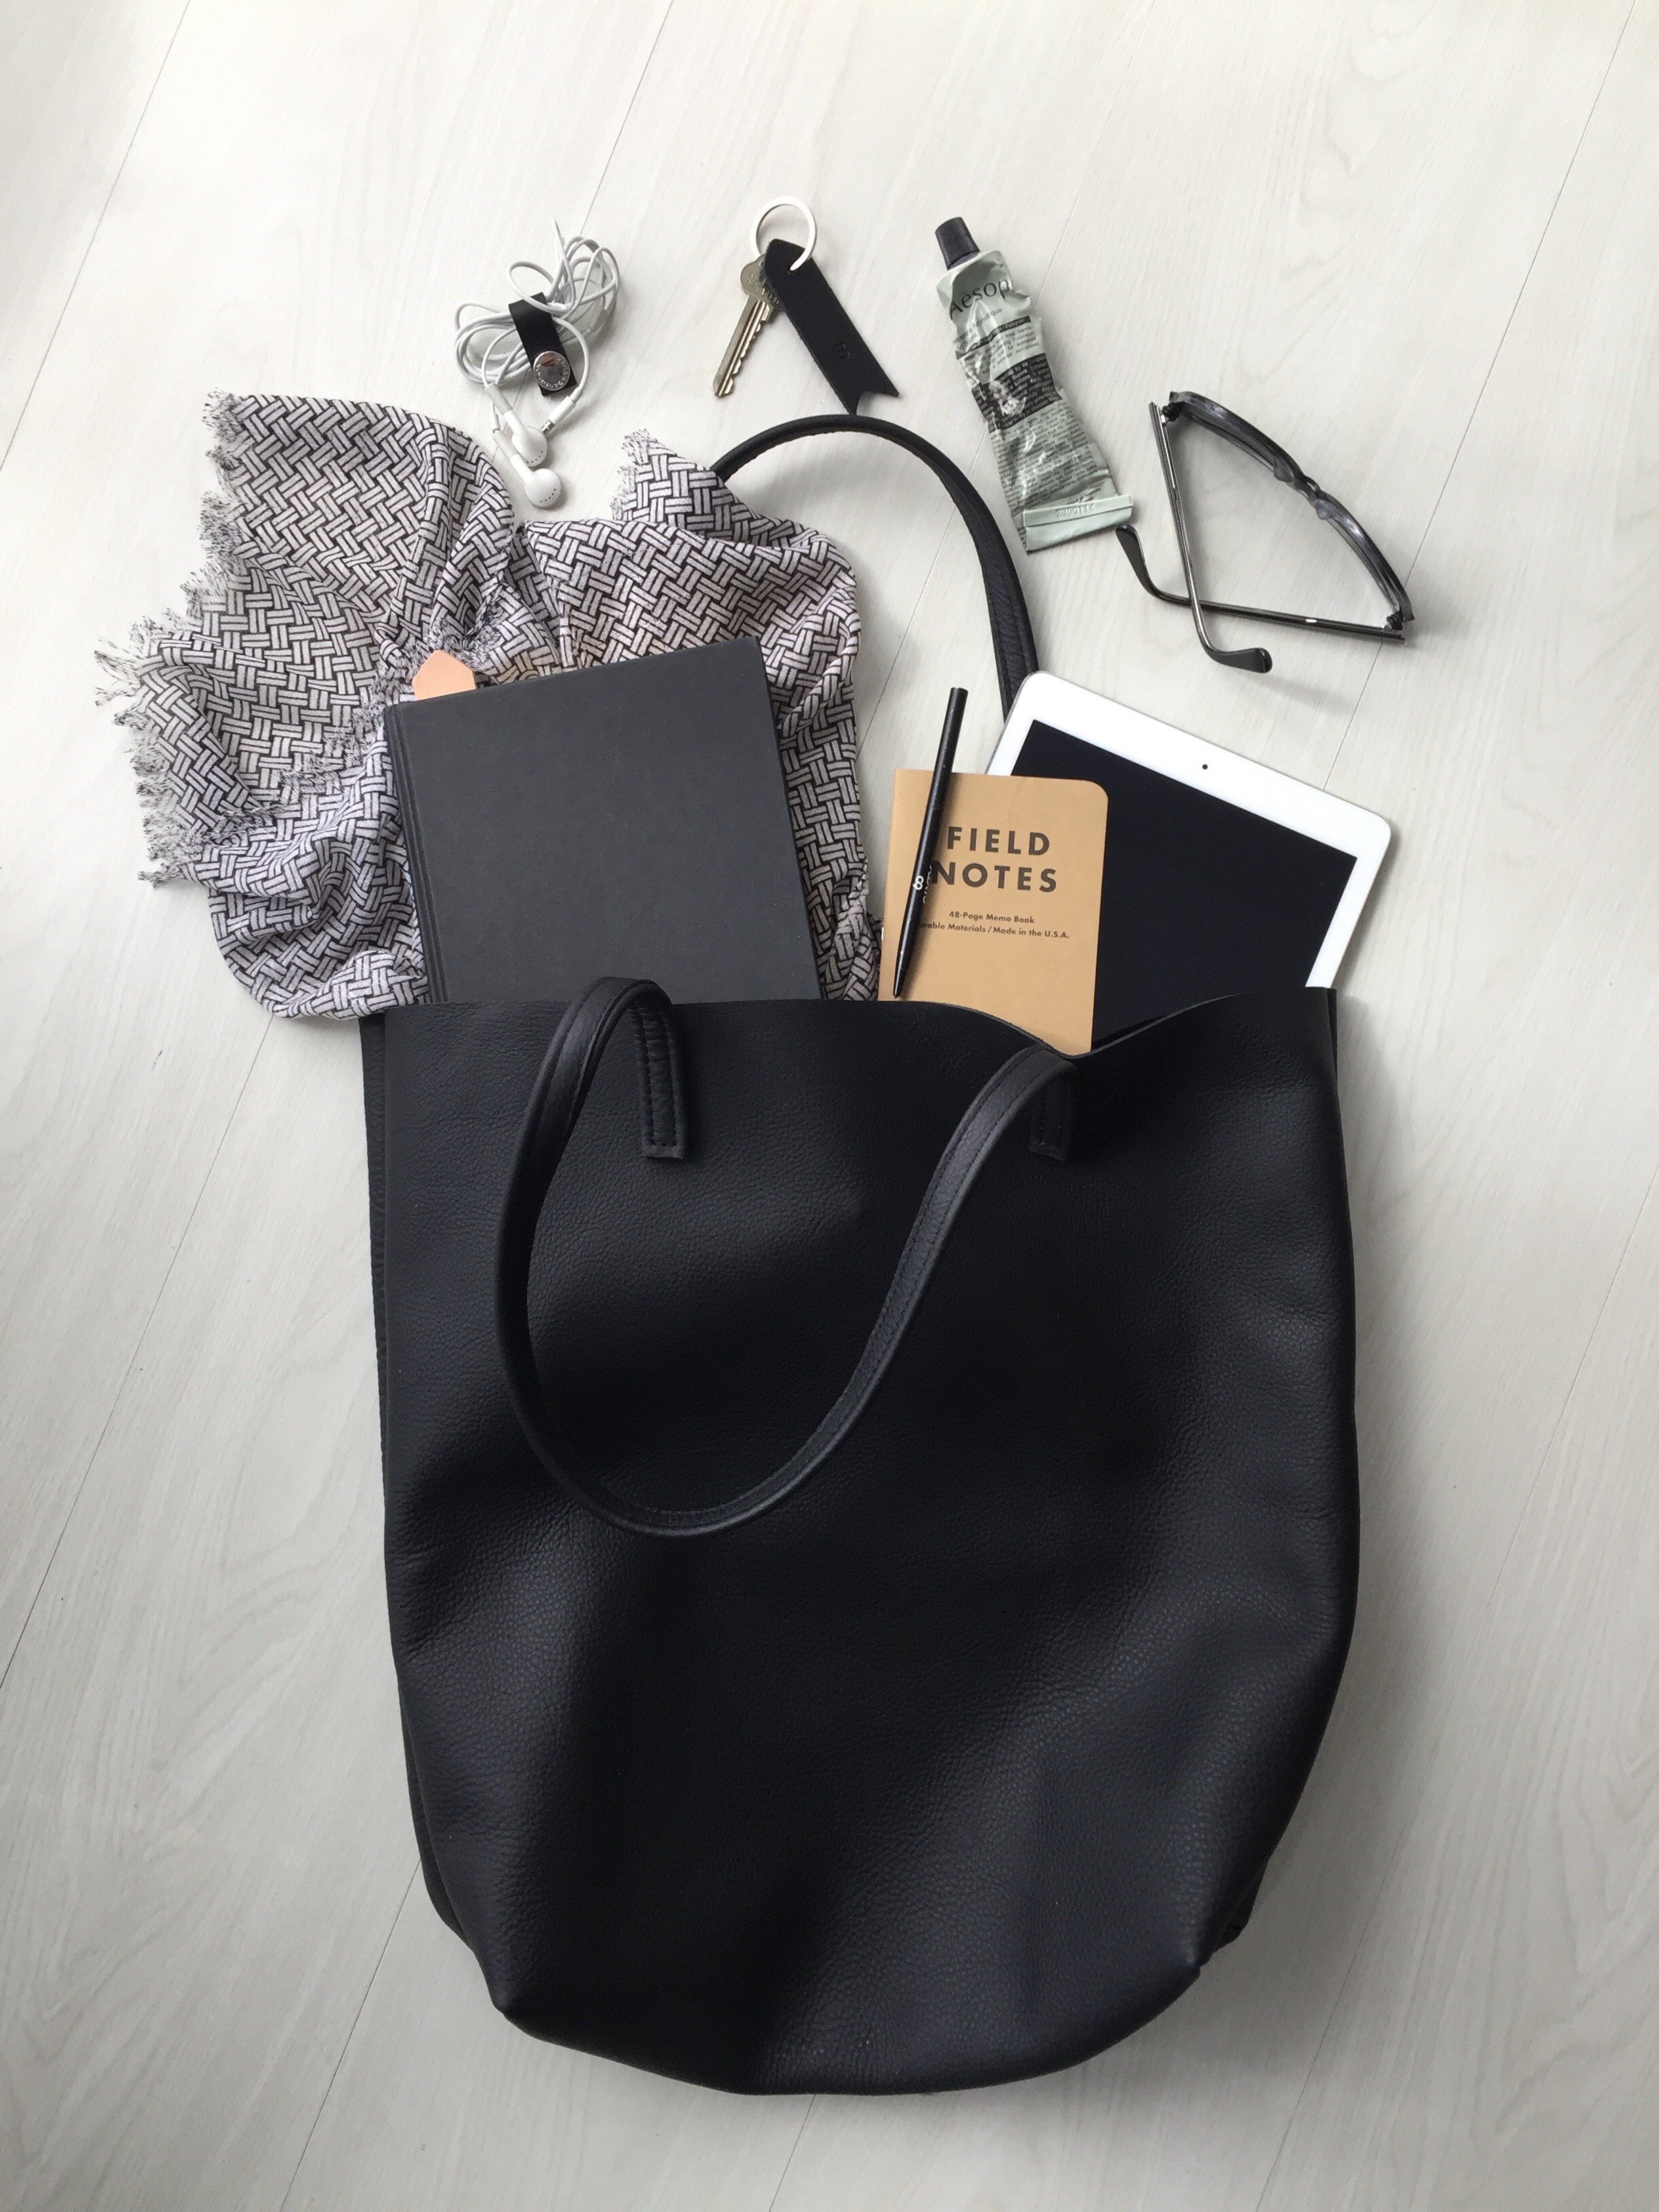 Raw Leather Tote Bag